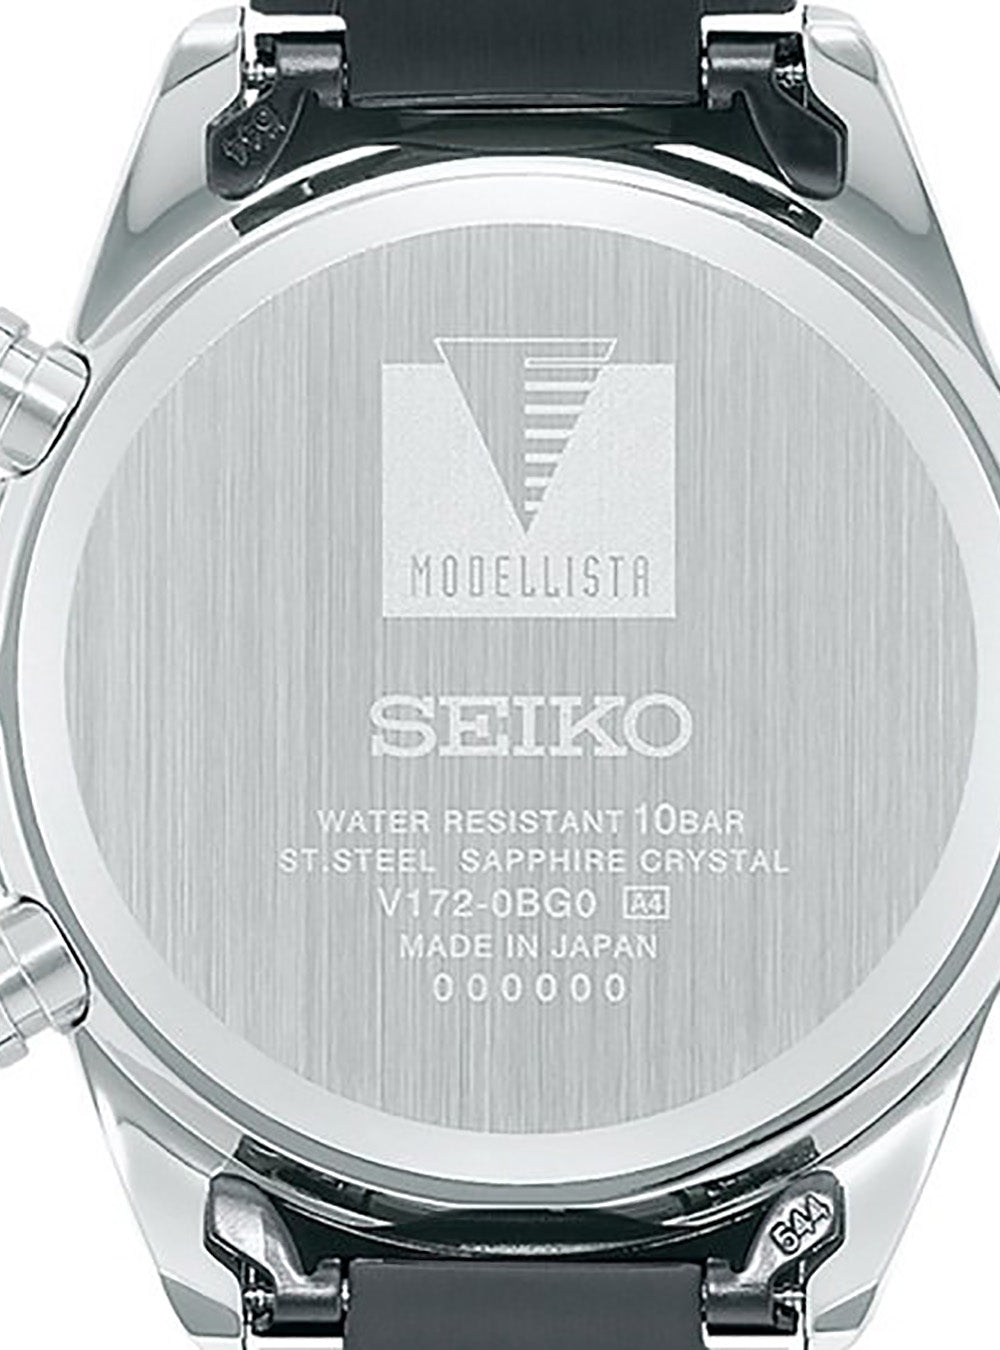 SEIKO SELECTION MODELLISTA SPECIAL EDITION SBPY173 MADE IN JAPAN JDM